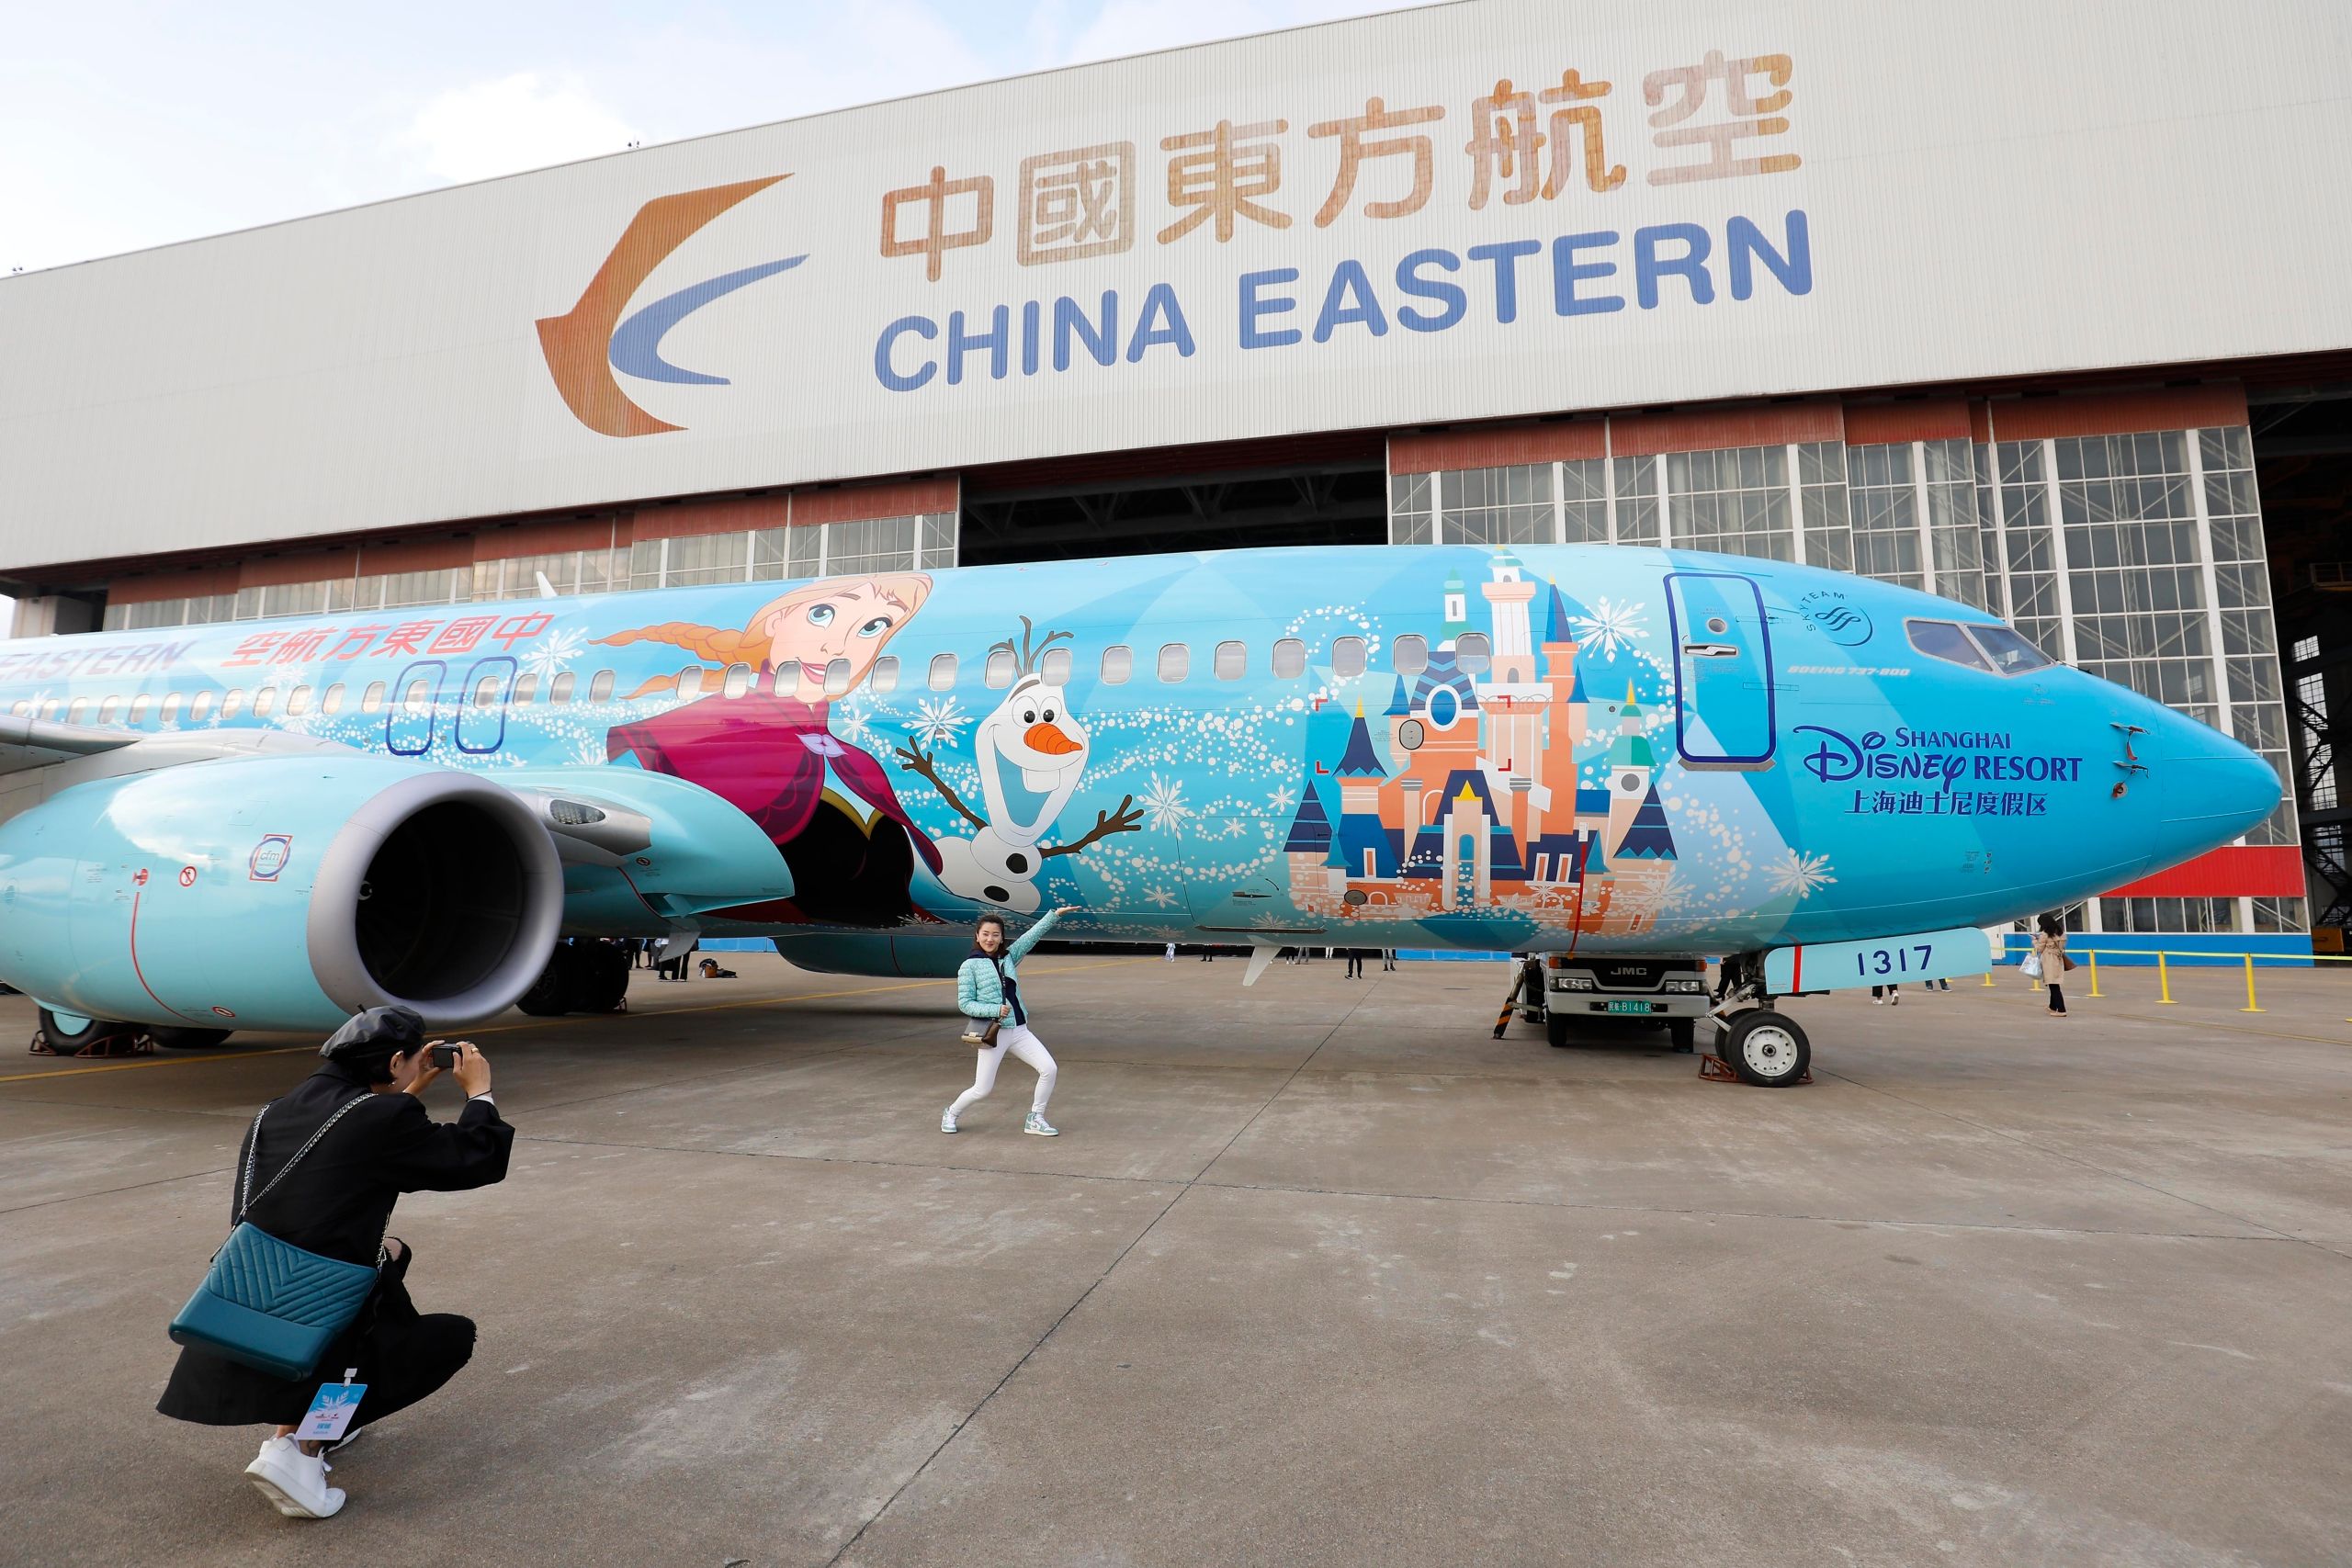 A Look At Azul's 3 Aircraft Painted With Disney's Livery